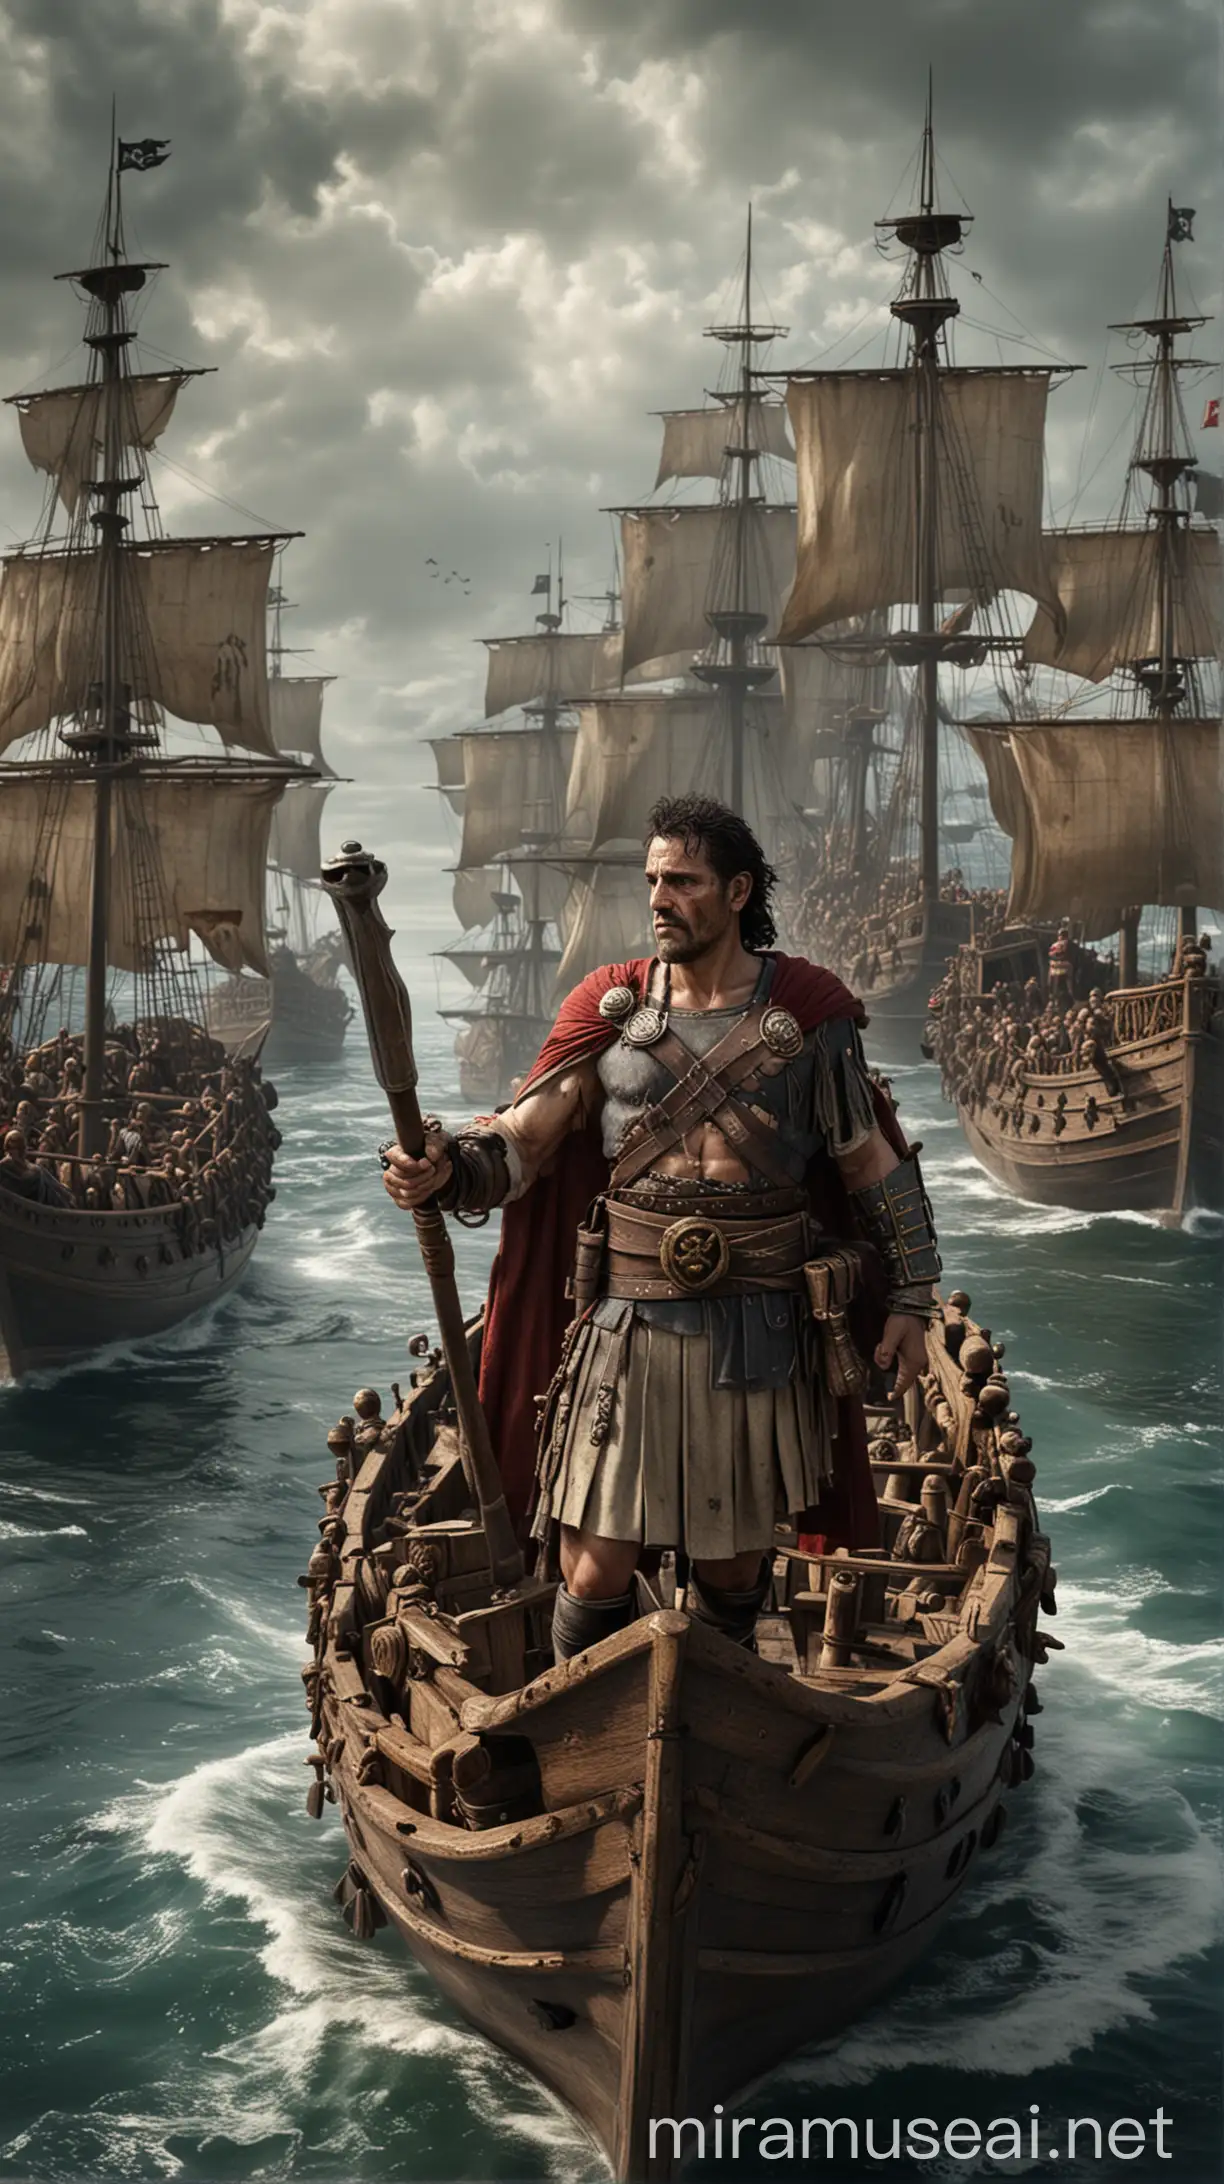 Caesar leading a fleet of ships back to the pirates' stronghold, determined and prepared for battle. hyper realistic